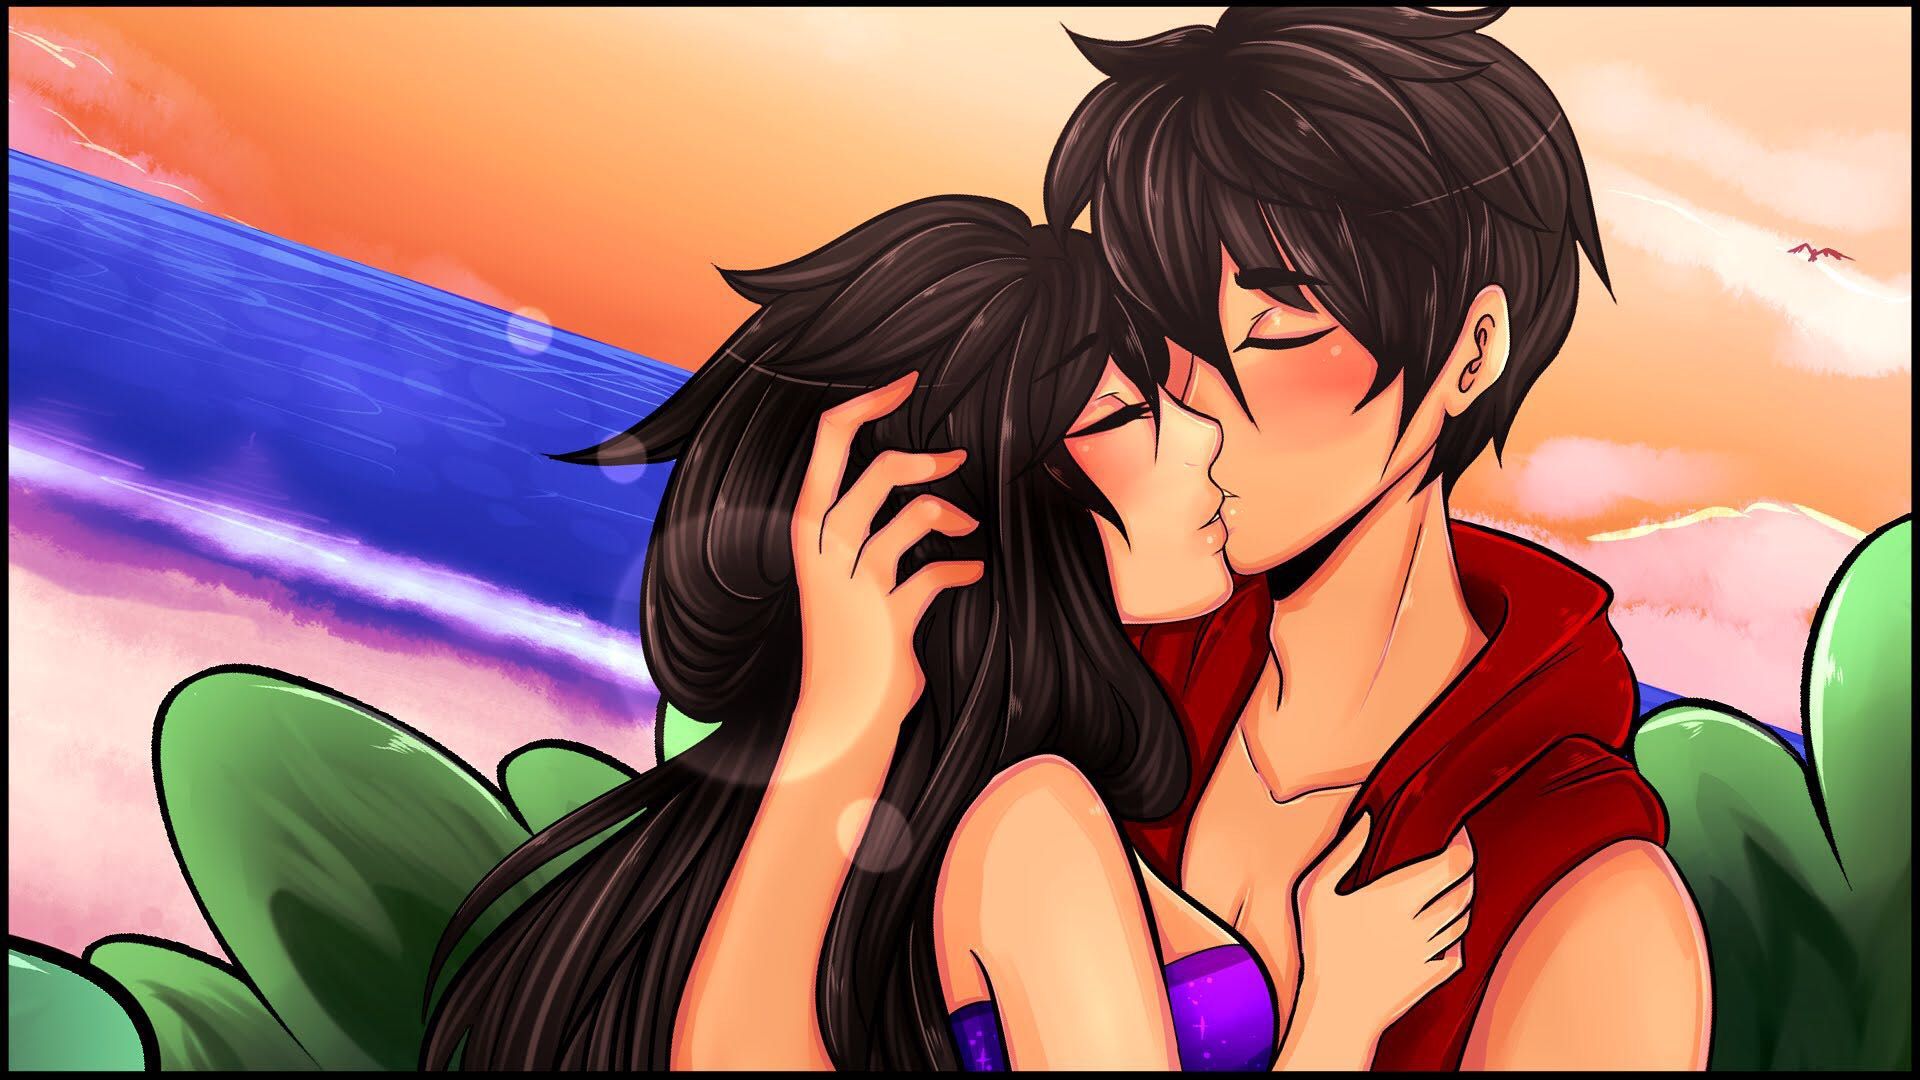 COMPLETED) idahlia • ships and sinks book 's Roleplay's X Aphmau